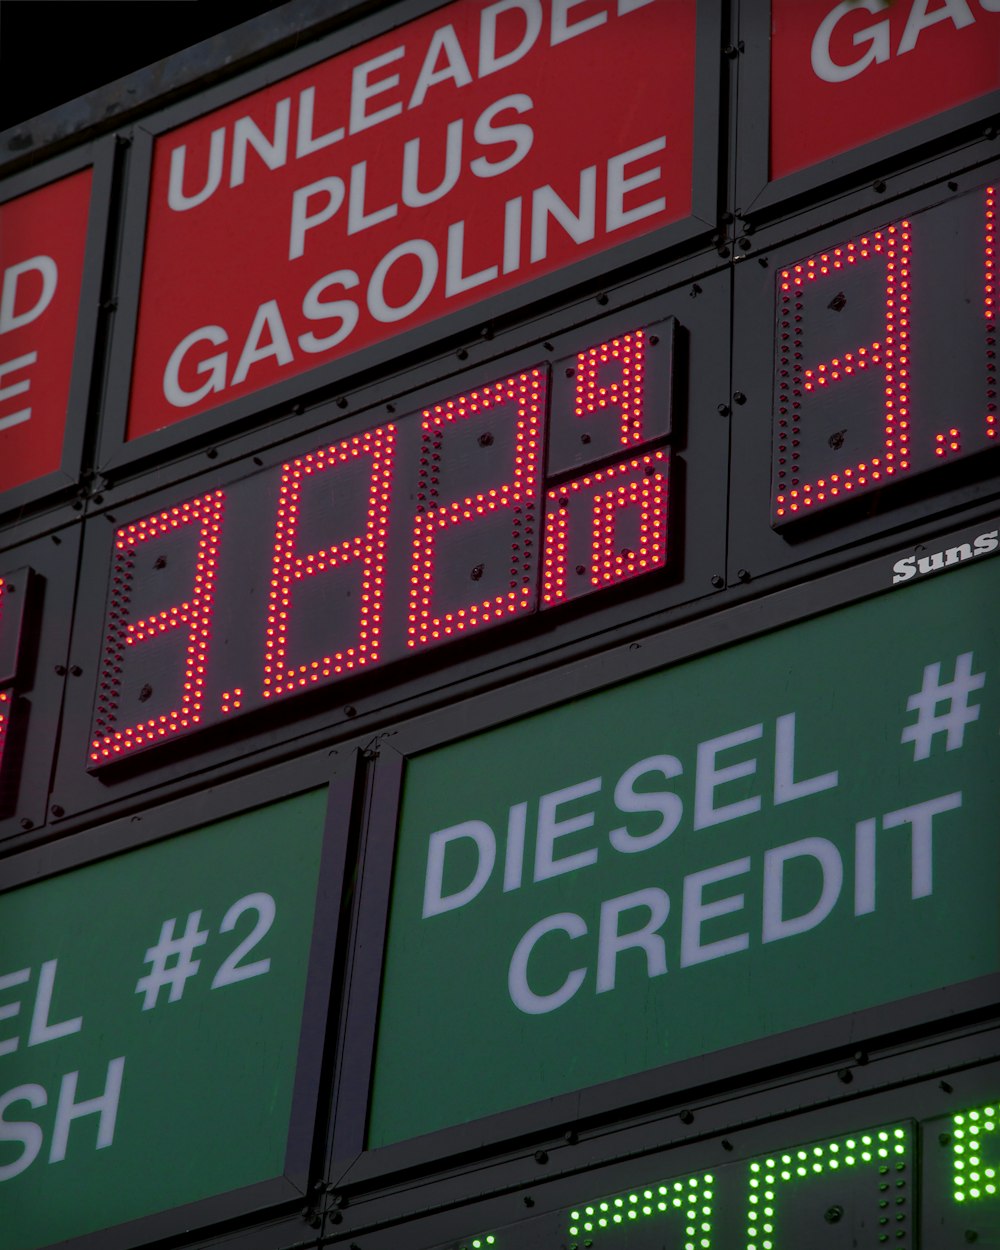 a gas station sign showing diesel and cash